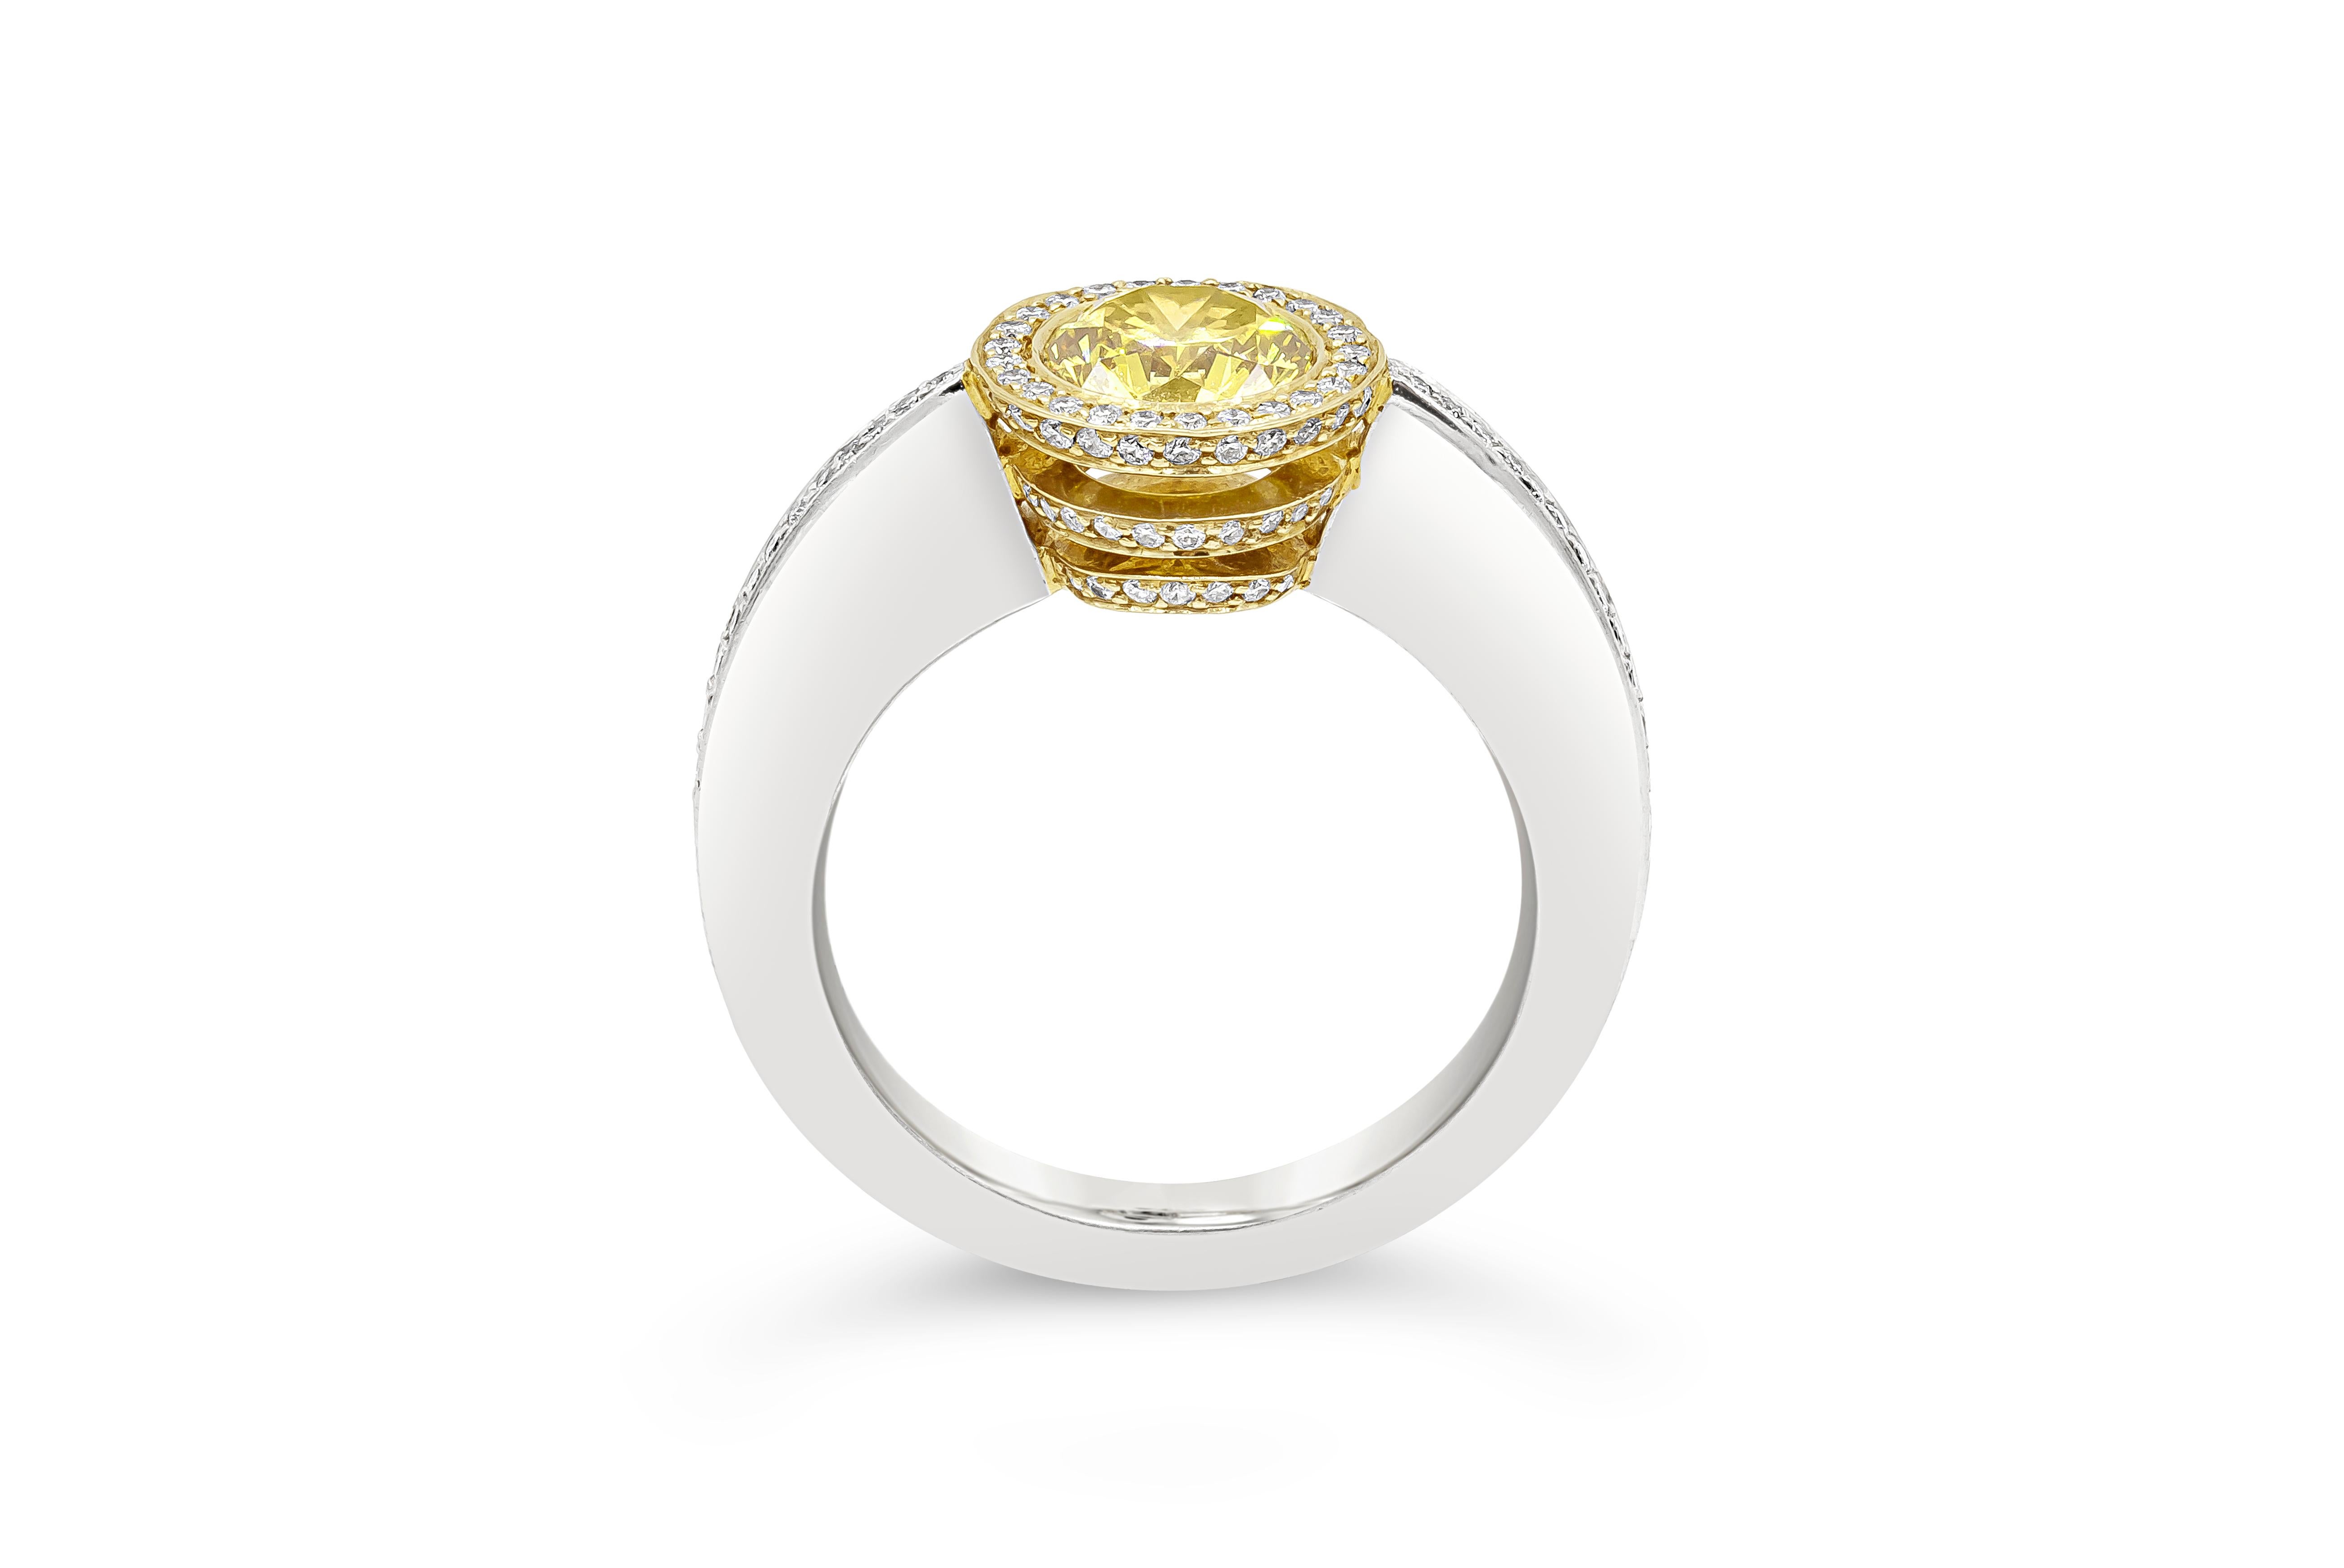 A unique engagement ring, showcasing a bezel-set 1.02 carat yellow diamond certified by GIA as Fancy Deep Brownish Yellow color and VS2 clarity, surrounded by white diamonds in a halo design and mounted on 18K yellow gold. The shank is encrusted